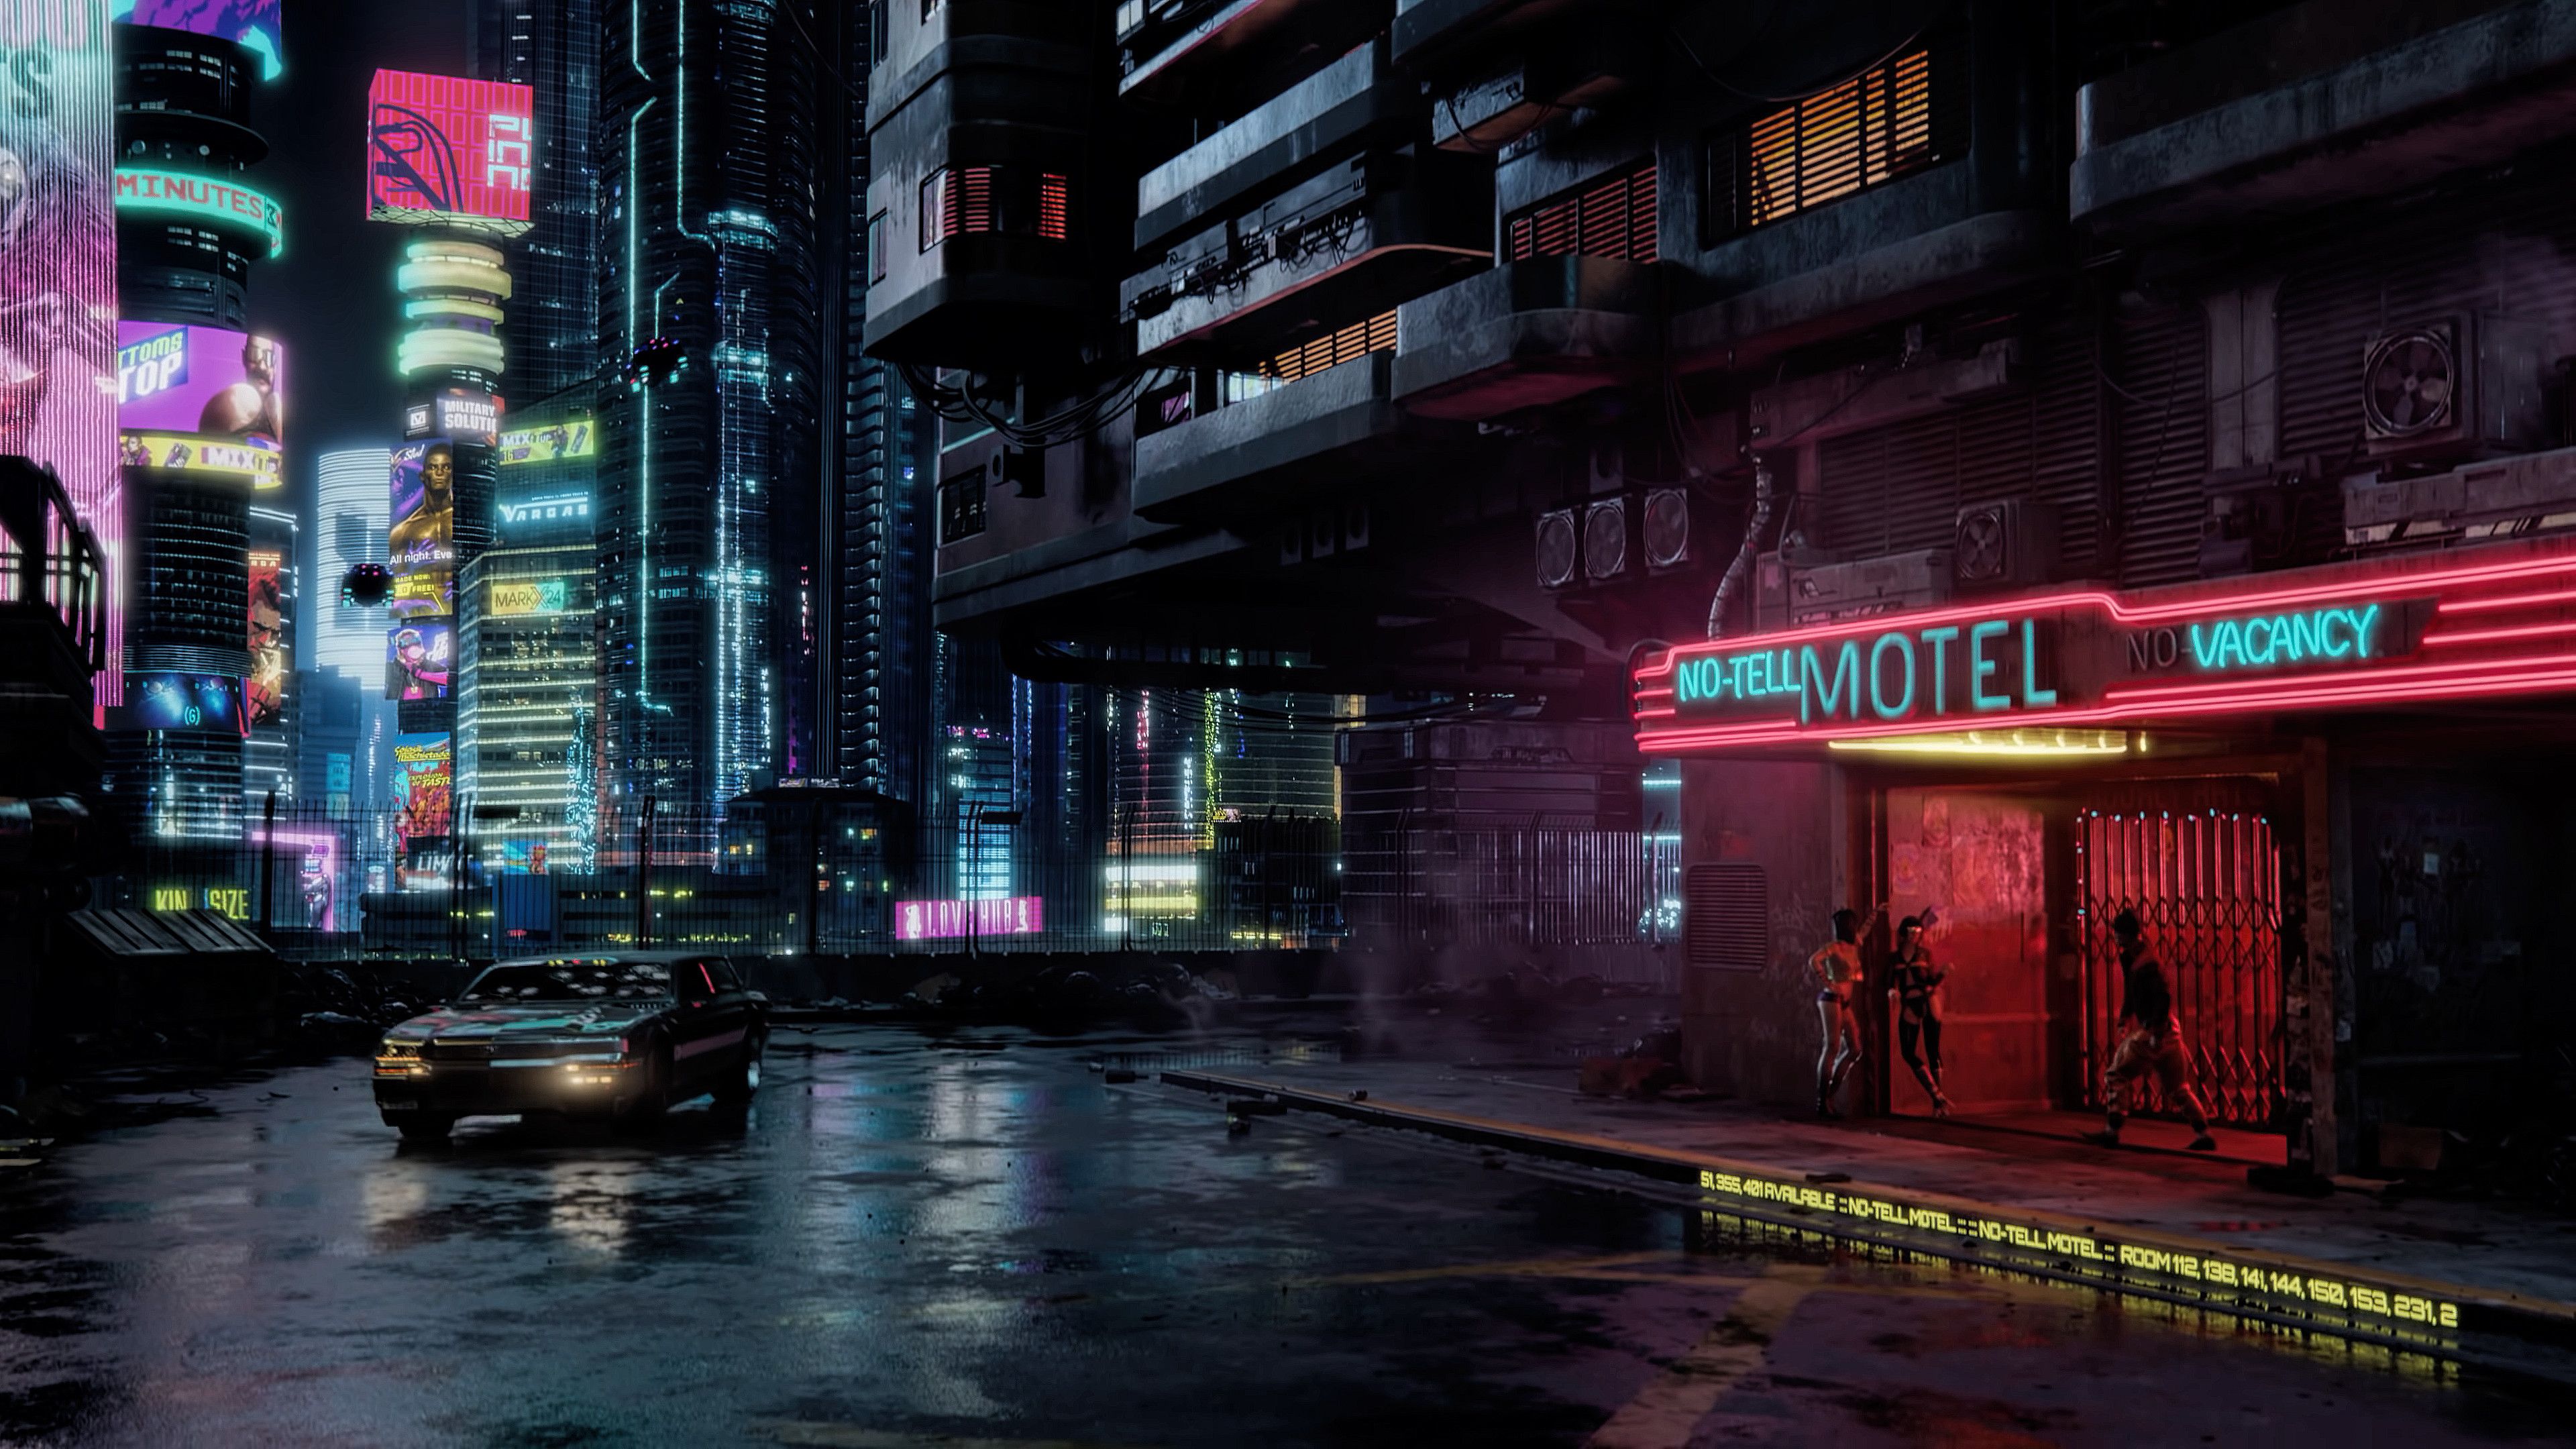 Cyberpunk 4K wallpaper for your desktop or mobile screen free and easy to download